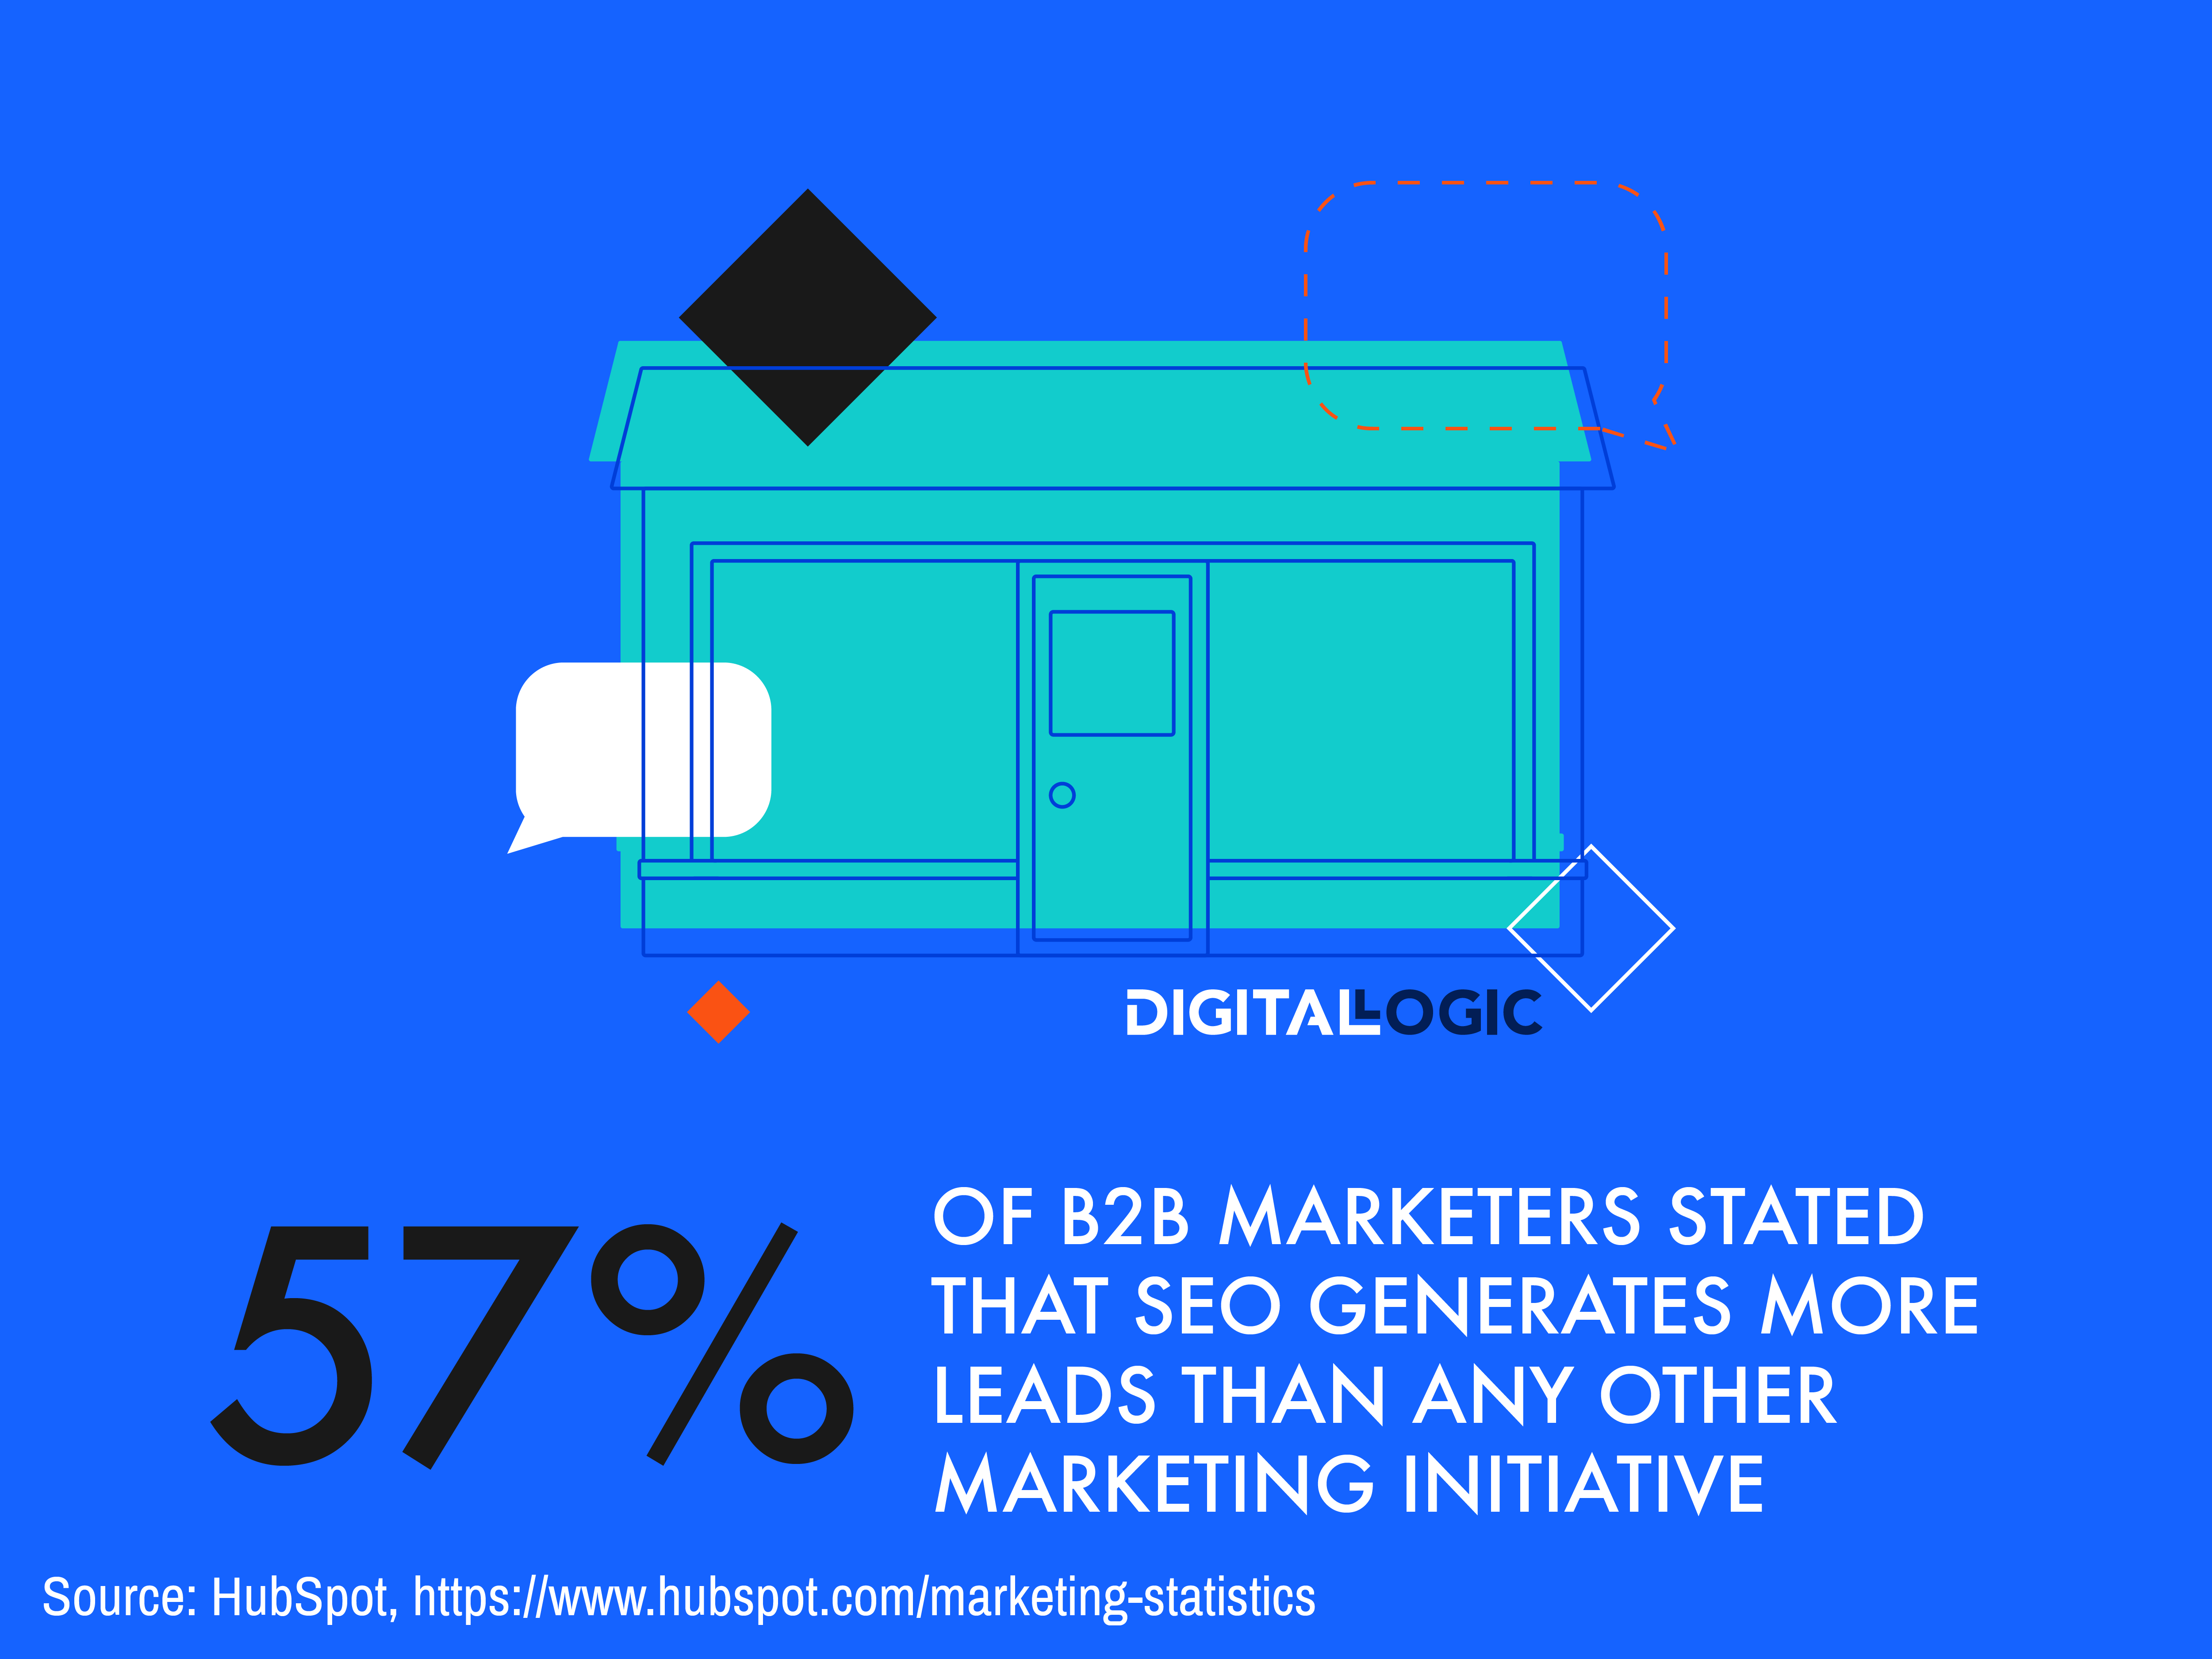 57 percent of B2B marketers stated that SEO generates more leads than any other marketing initiative - Digital Logic